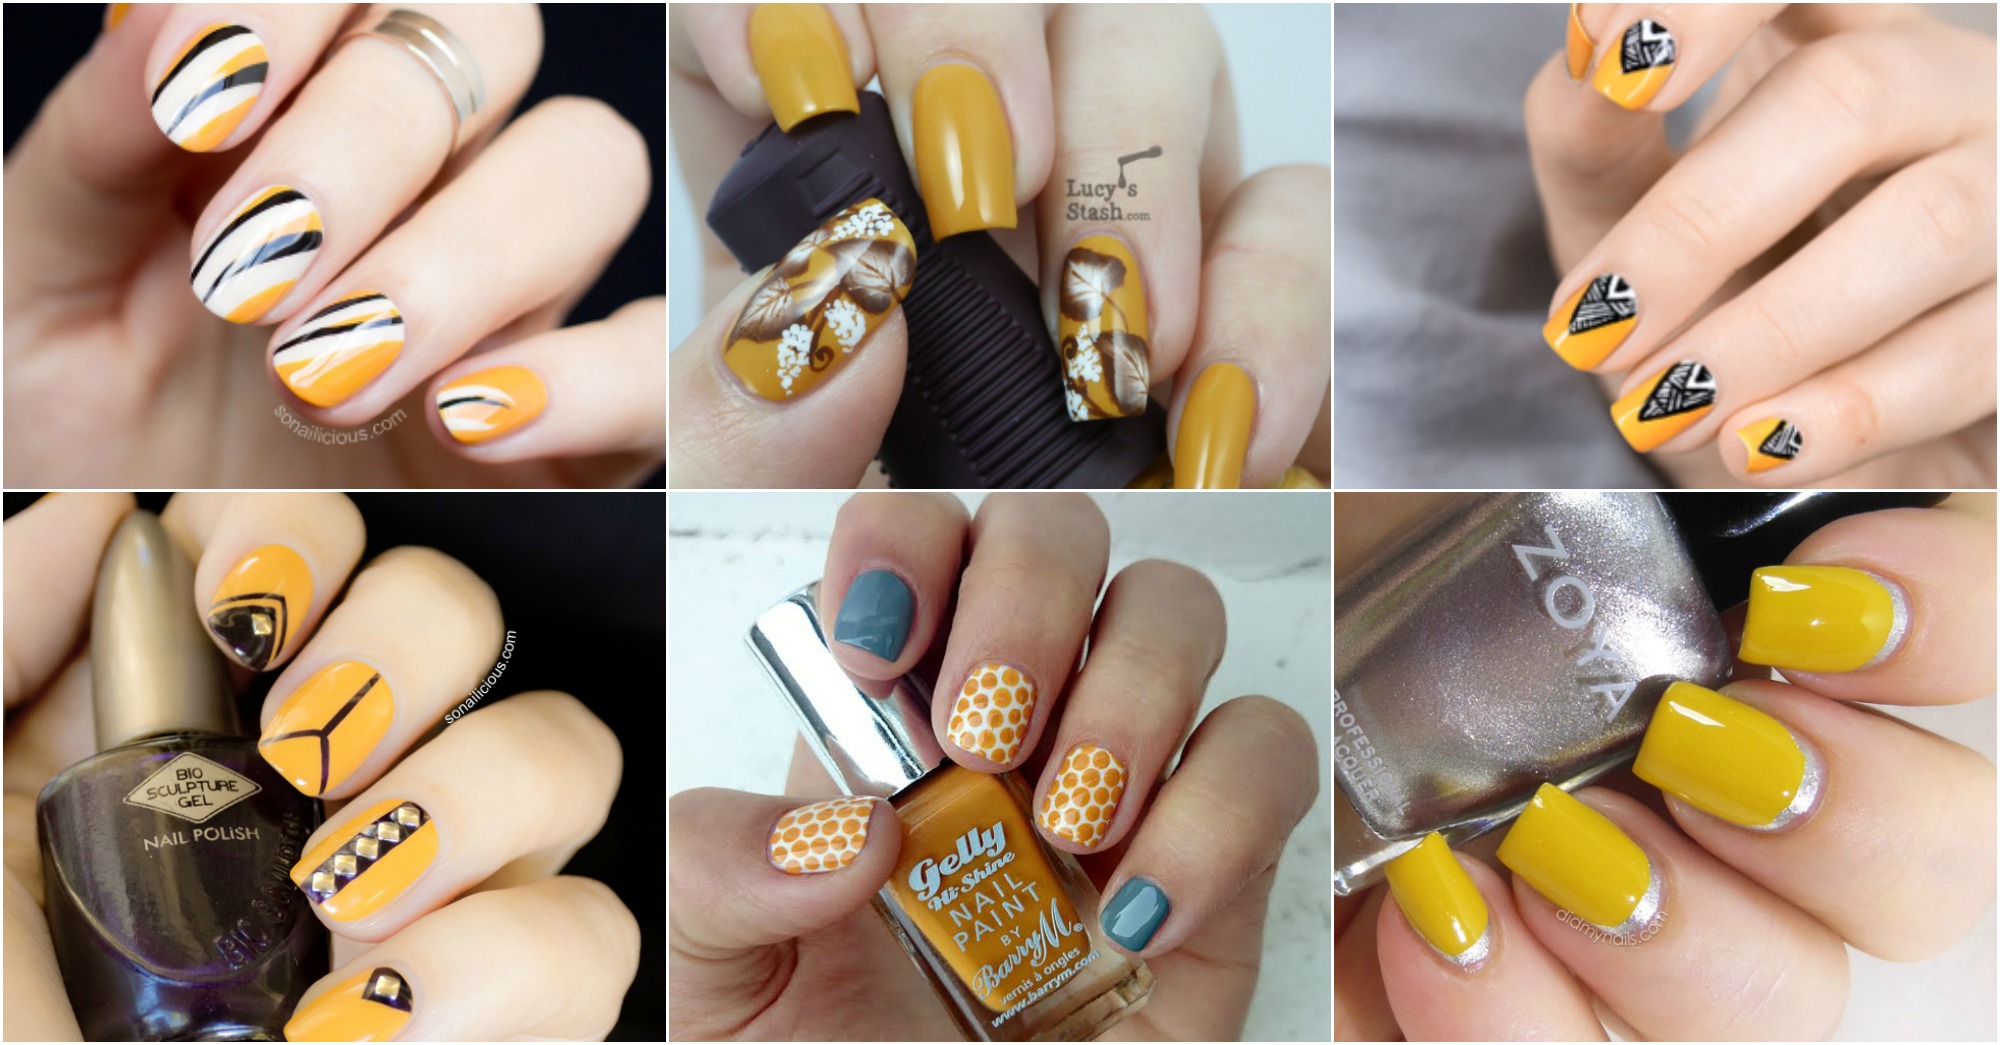 15 Lovely Mustard Nail Designs You Will Love To Copy - fashionsy.com